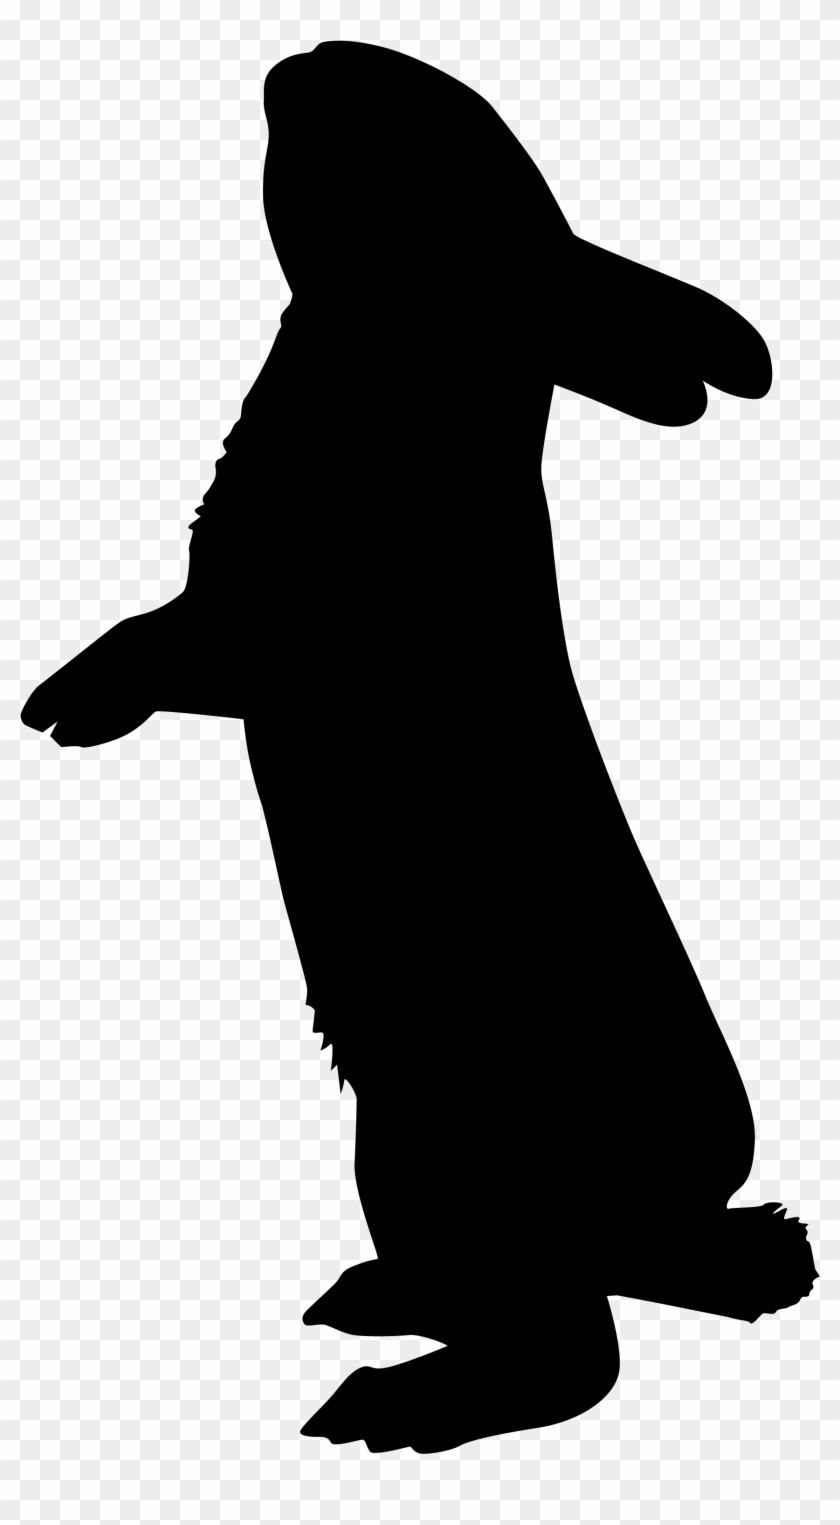 Rabbit Silhouette Png - Silhouette Bunny Clipart #6029070